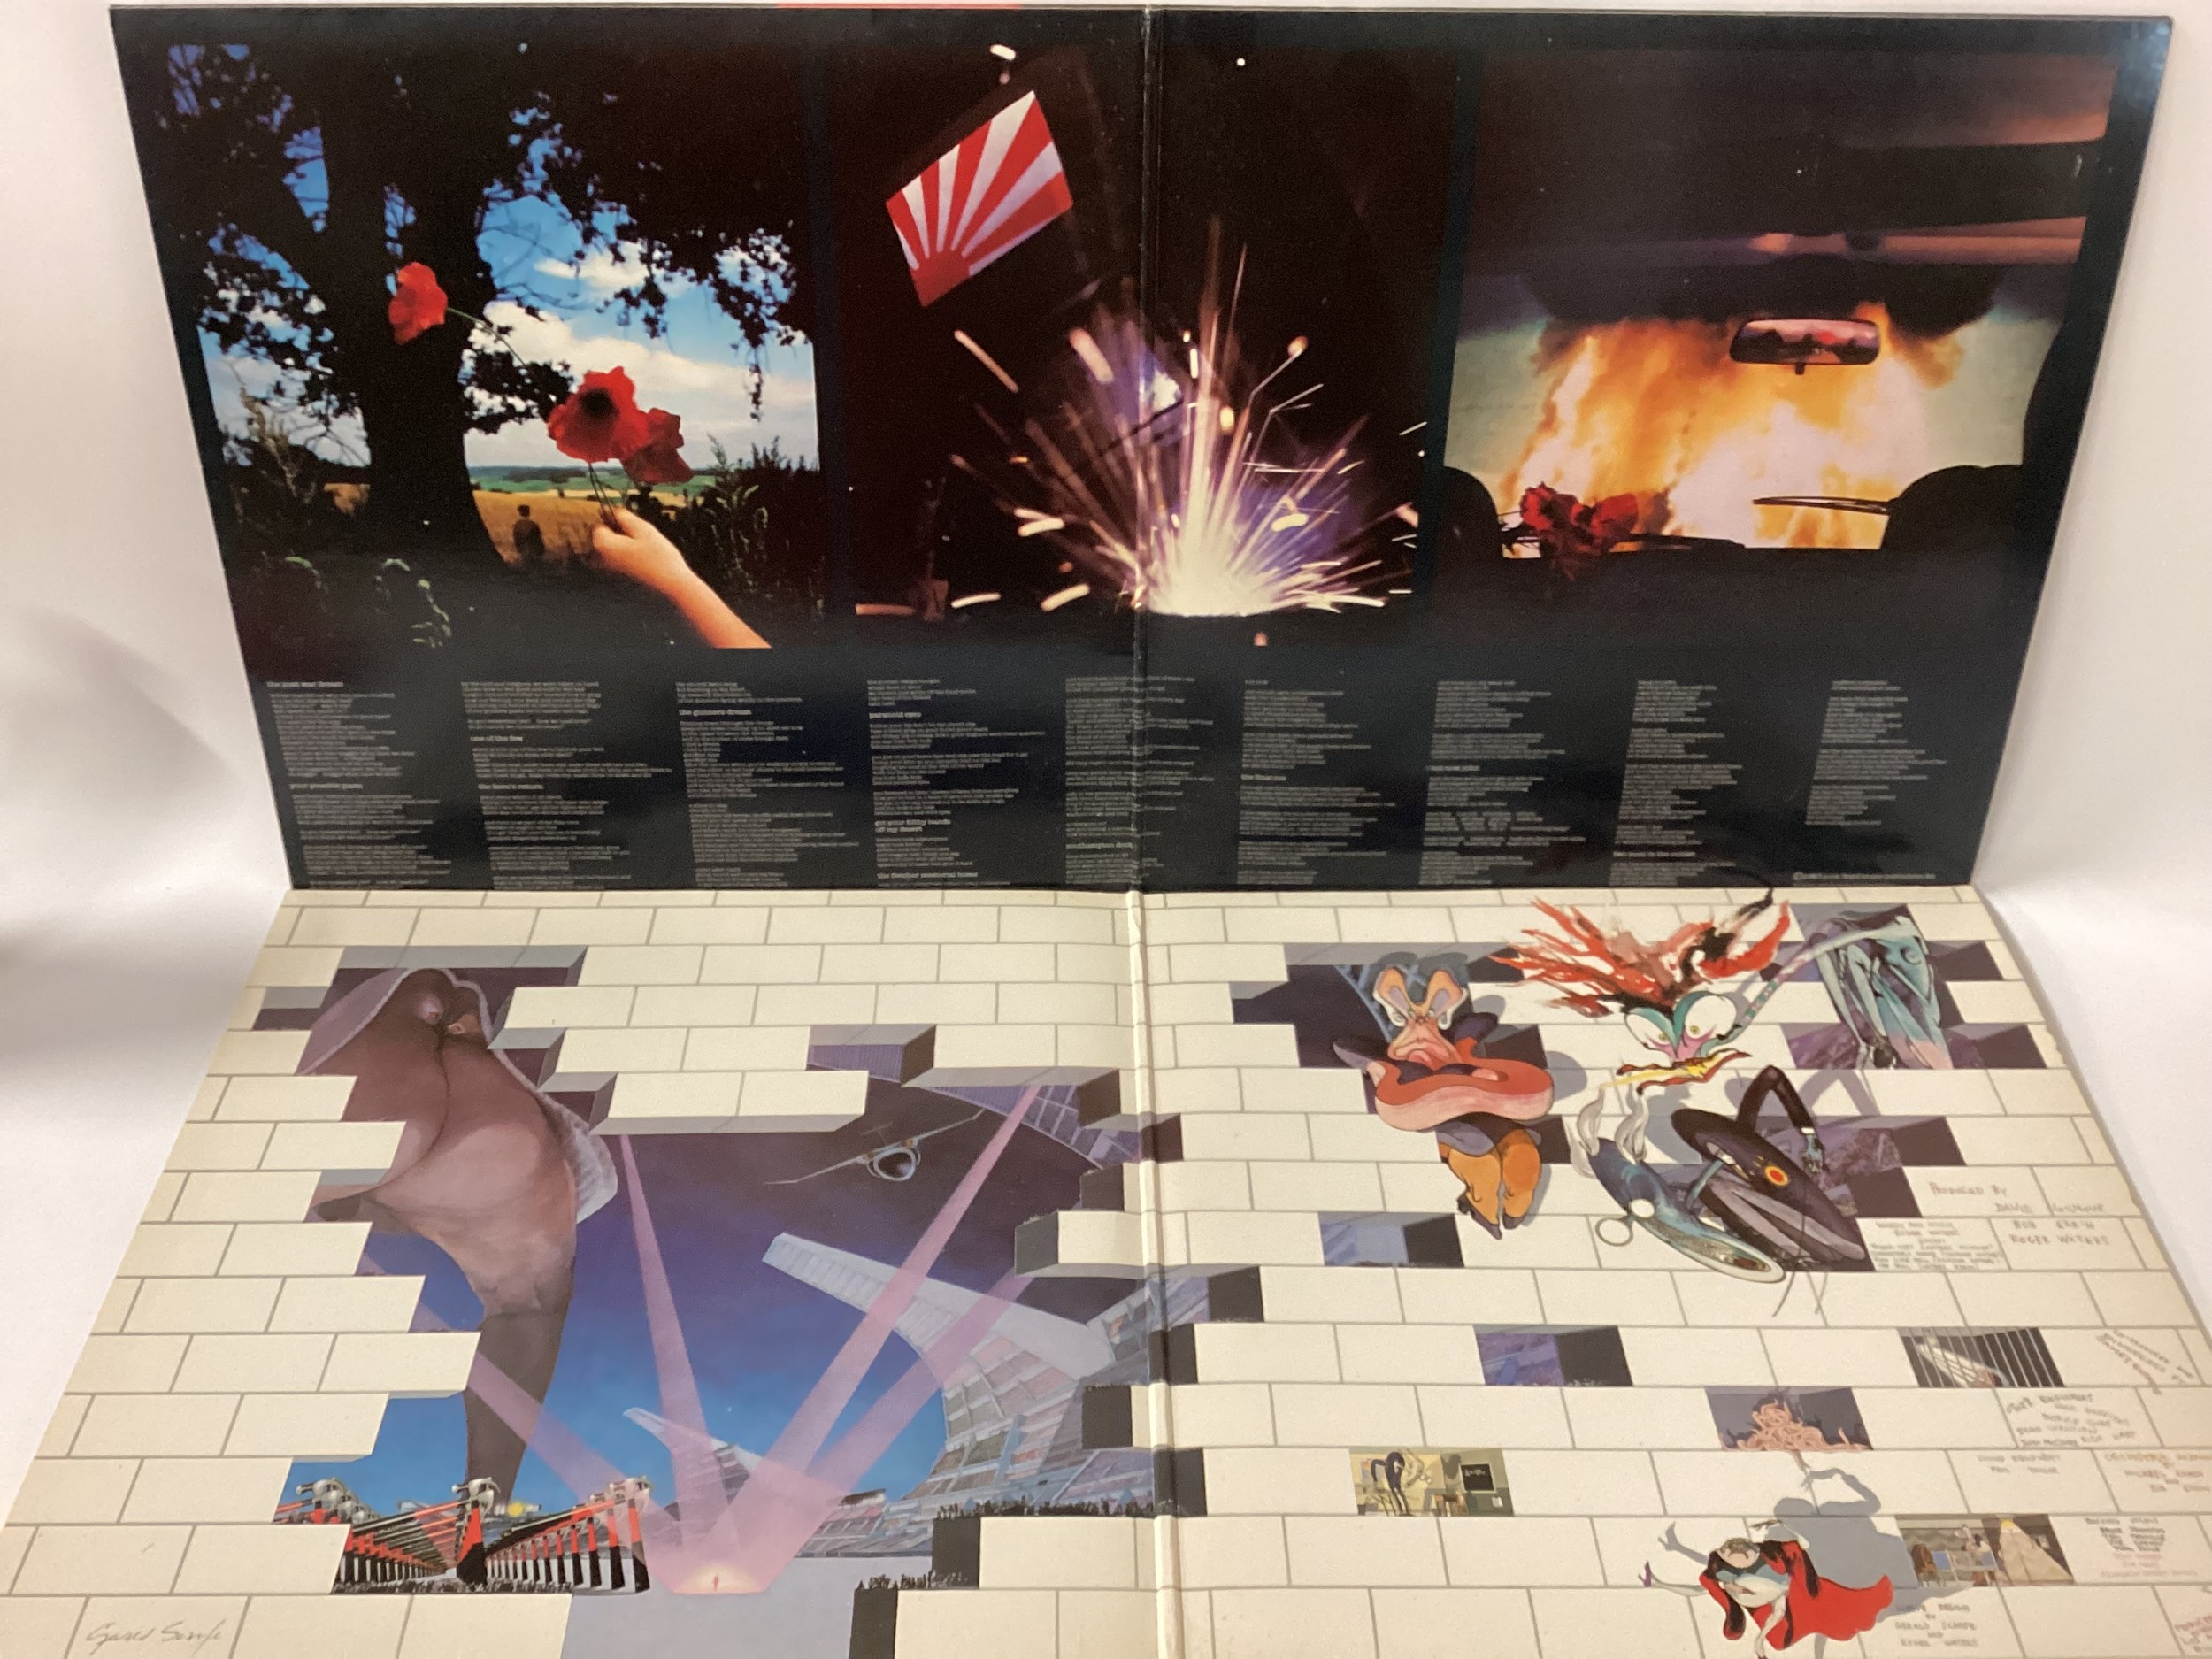 PINK FLOYD VINYL LP RECORDS X 2. Copies here include ‘The Wall’ double album on Harvest SHDW 411 - Image 3 of 9